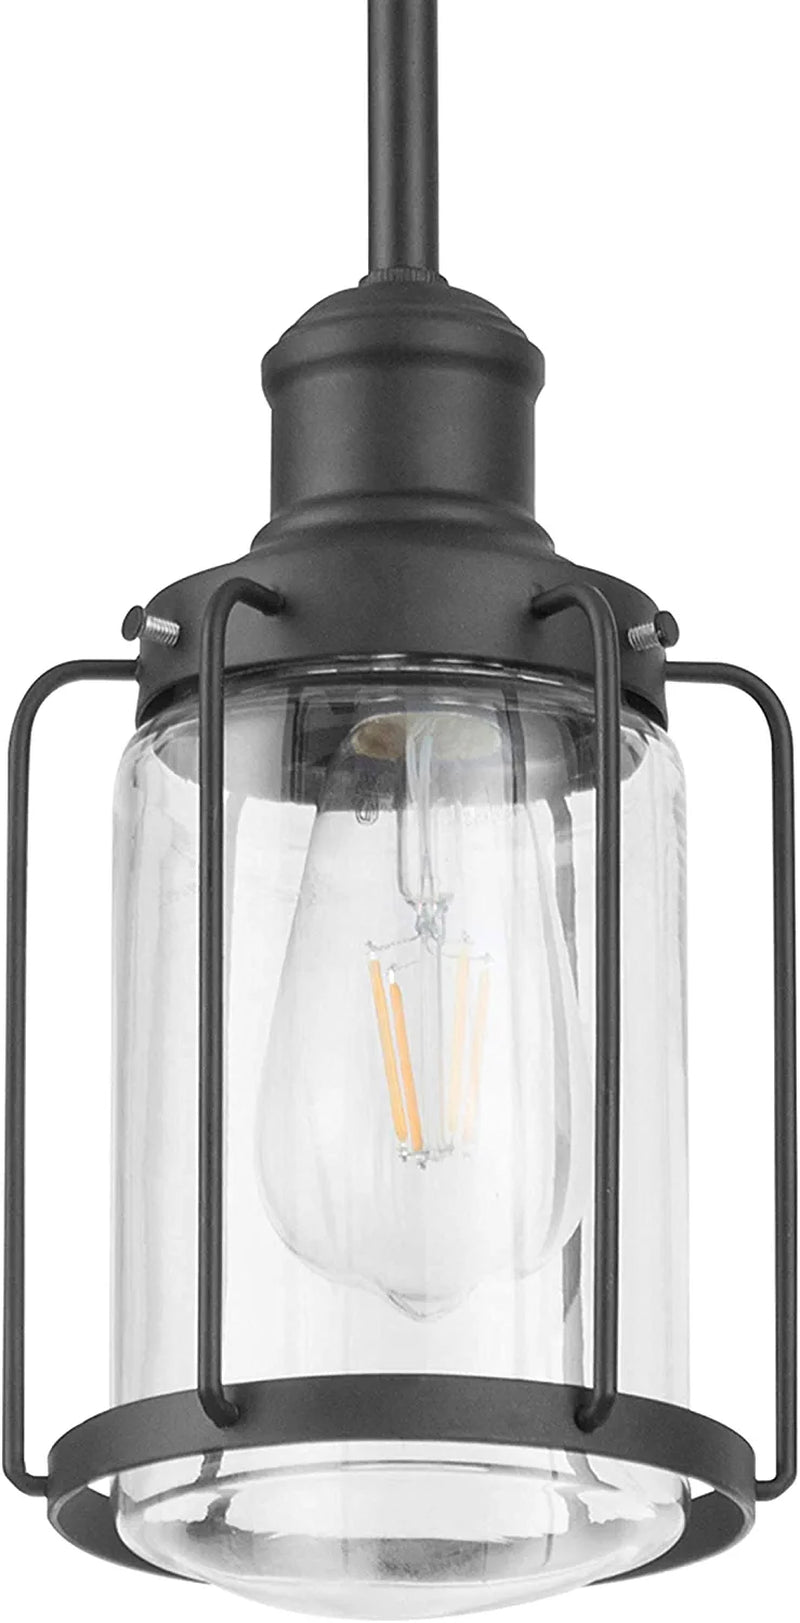 Prominence Home Lincoln Woods 1 Light Matte Black Industrial Pendant Light with Cage and Clear Glass Home & Garden > Lighting > Lighting Fixtures Prominence Home   